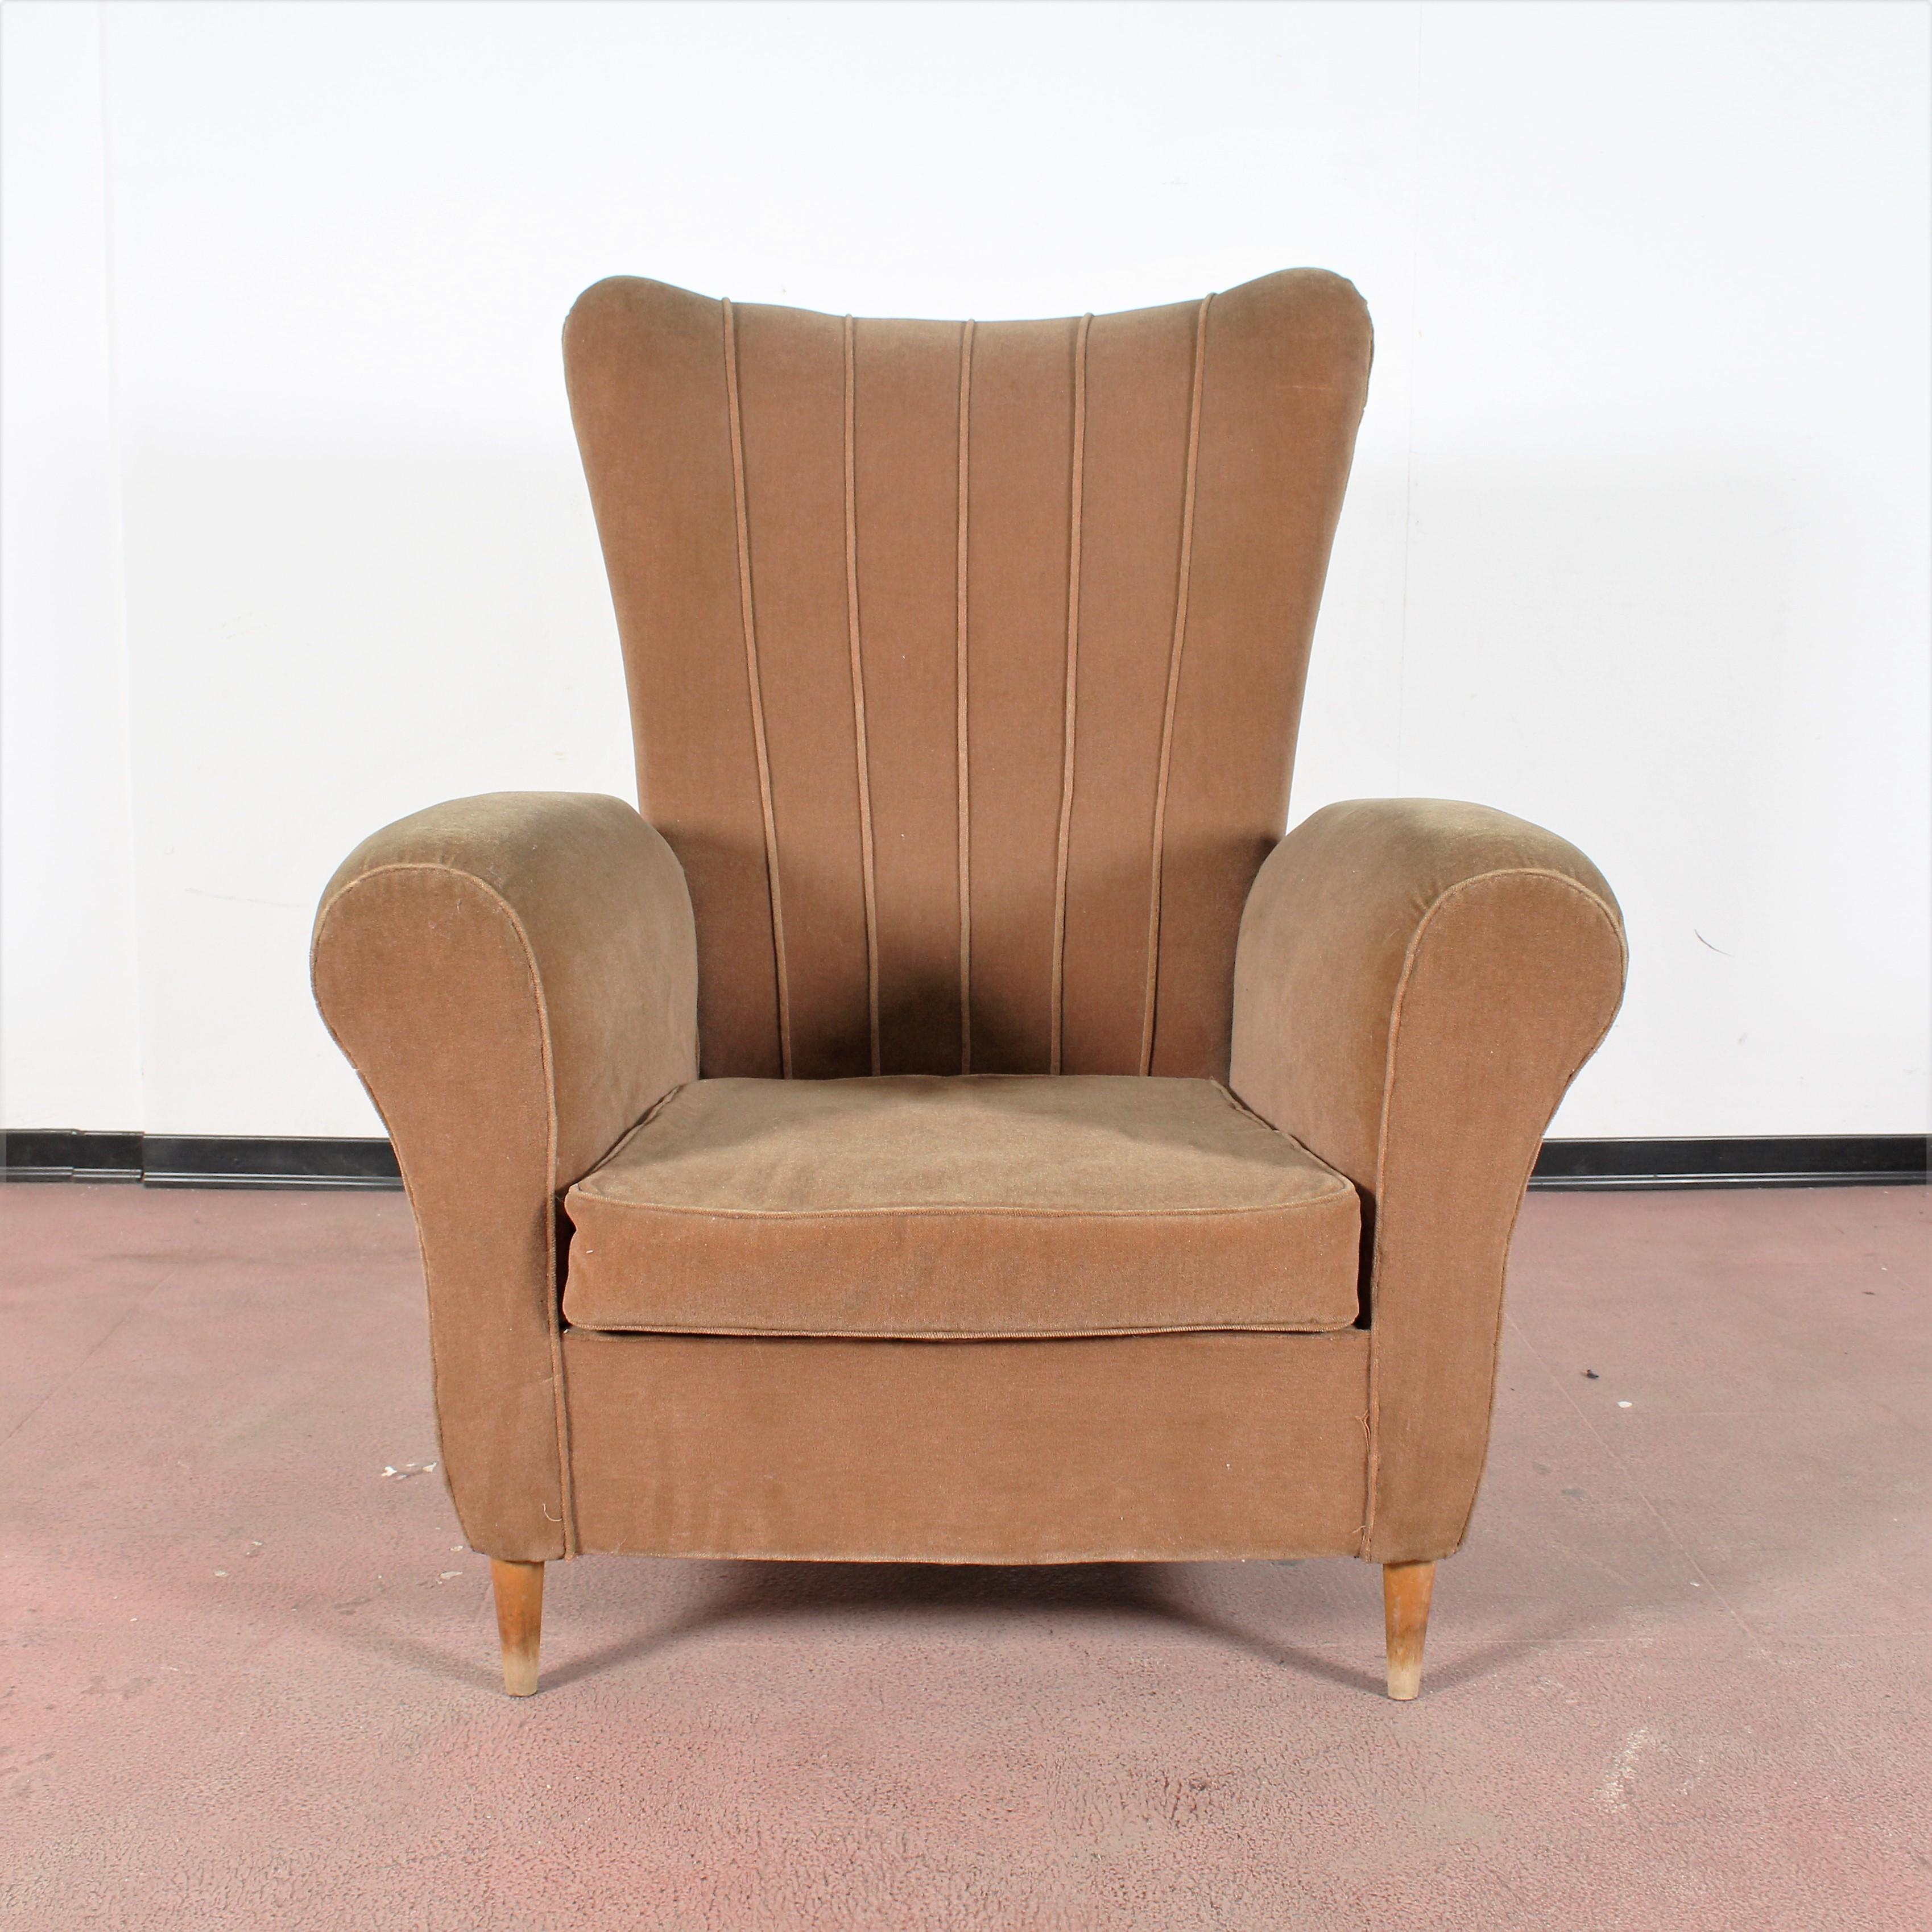 Very stylish camel-colored wool velvet armchair attributed to Melchiorre Bega, 1950s, Italy.
Wear consistent with age and use.